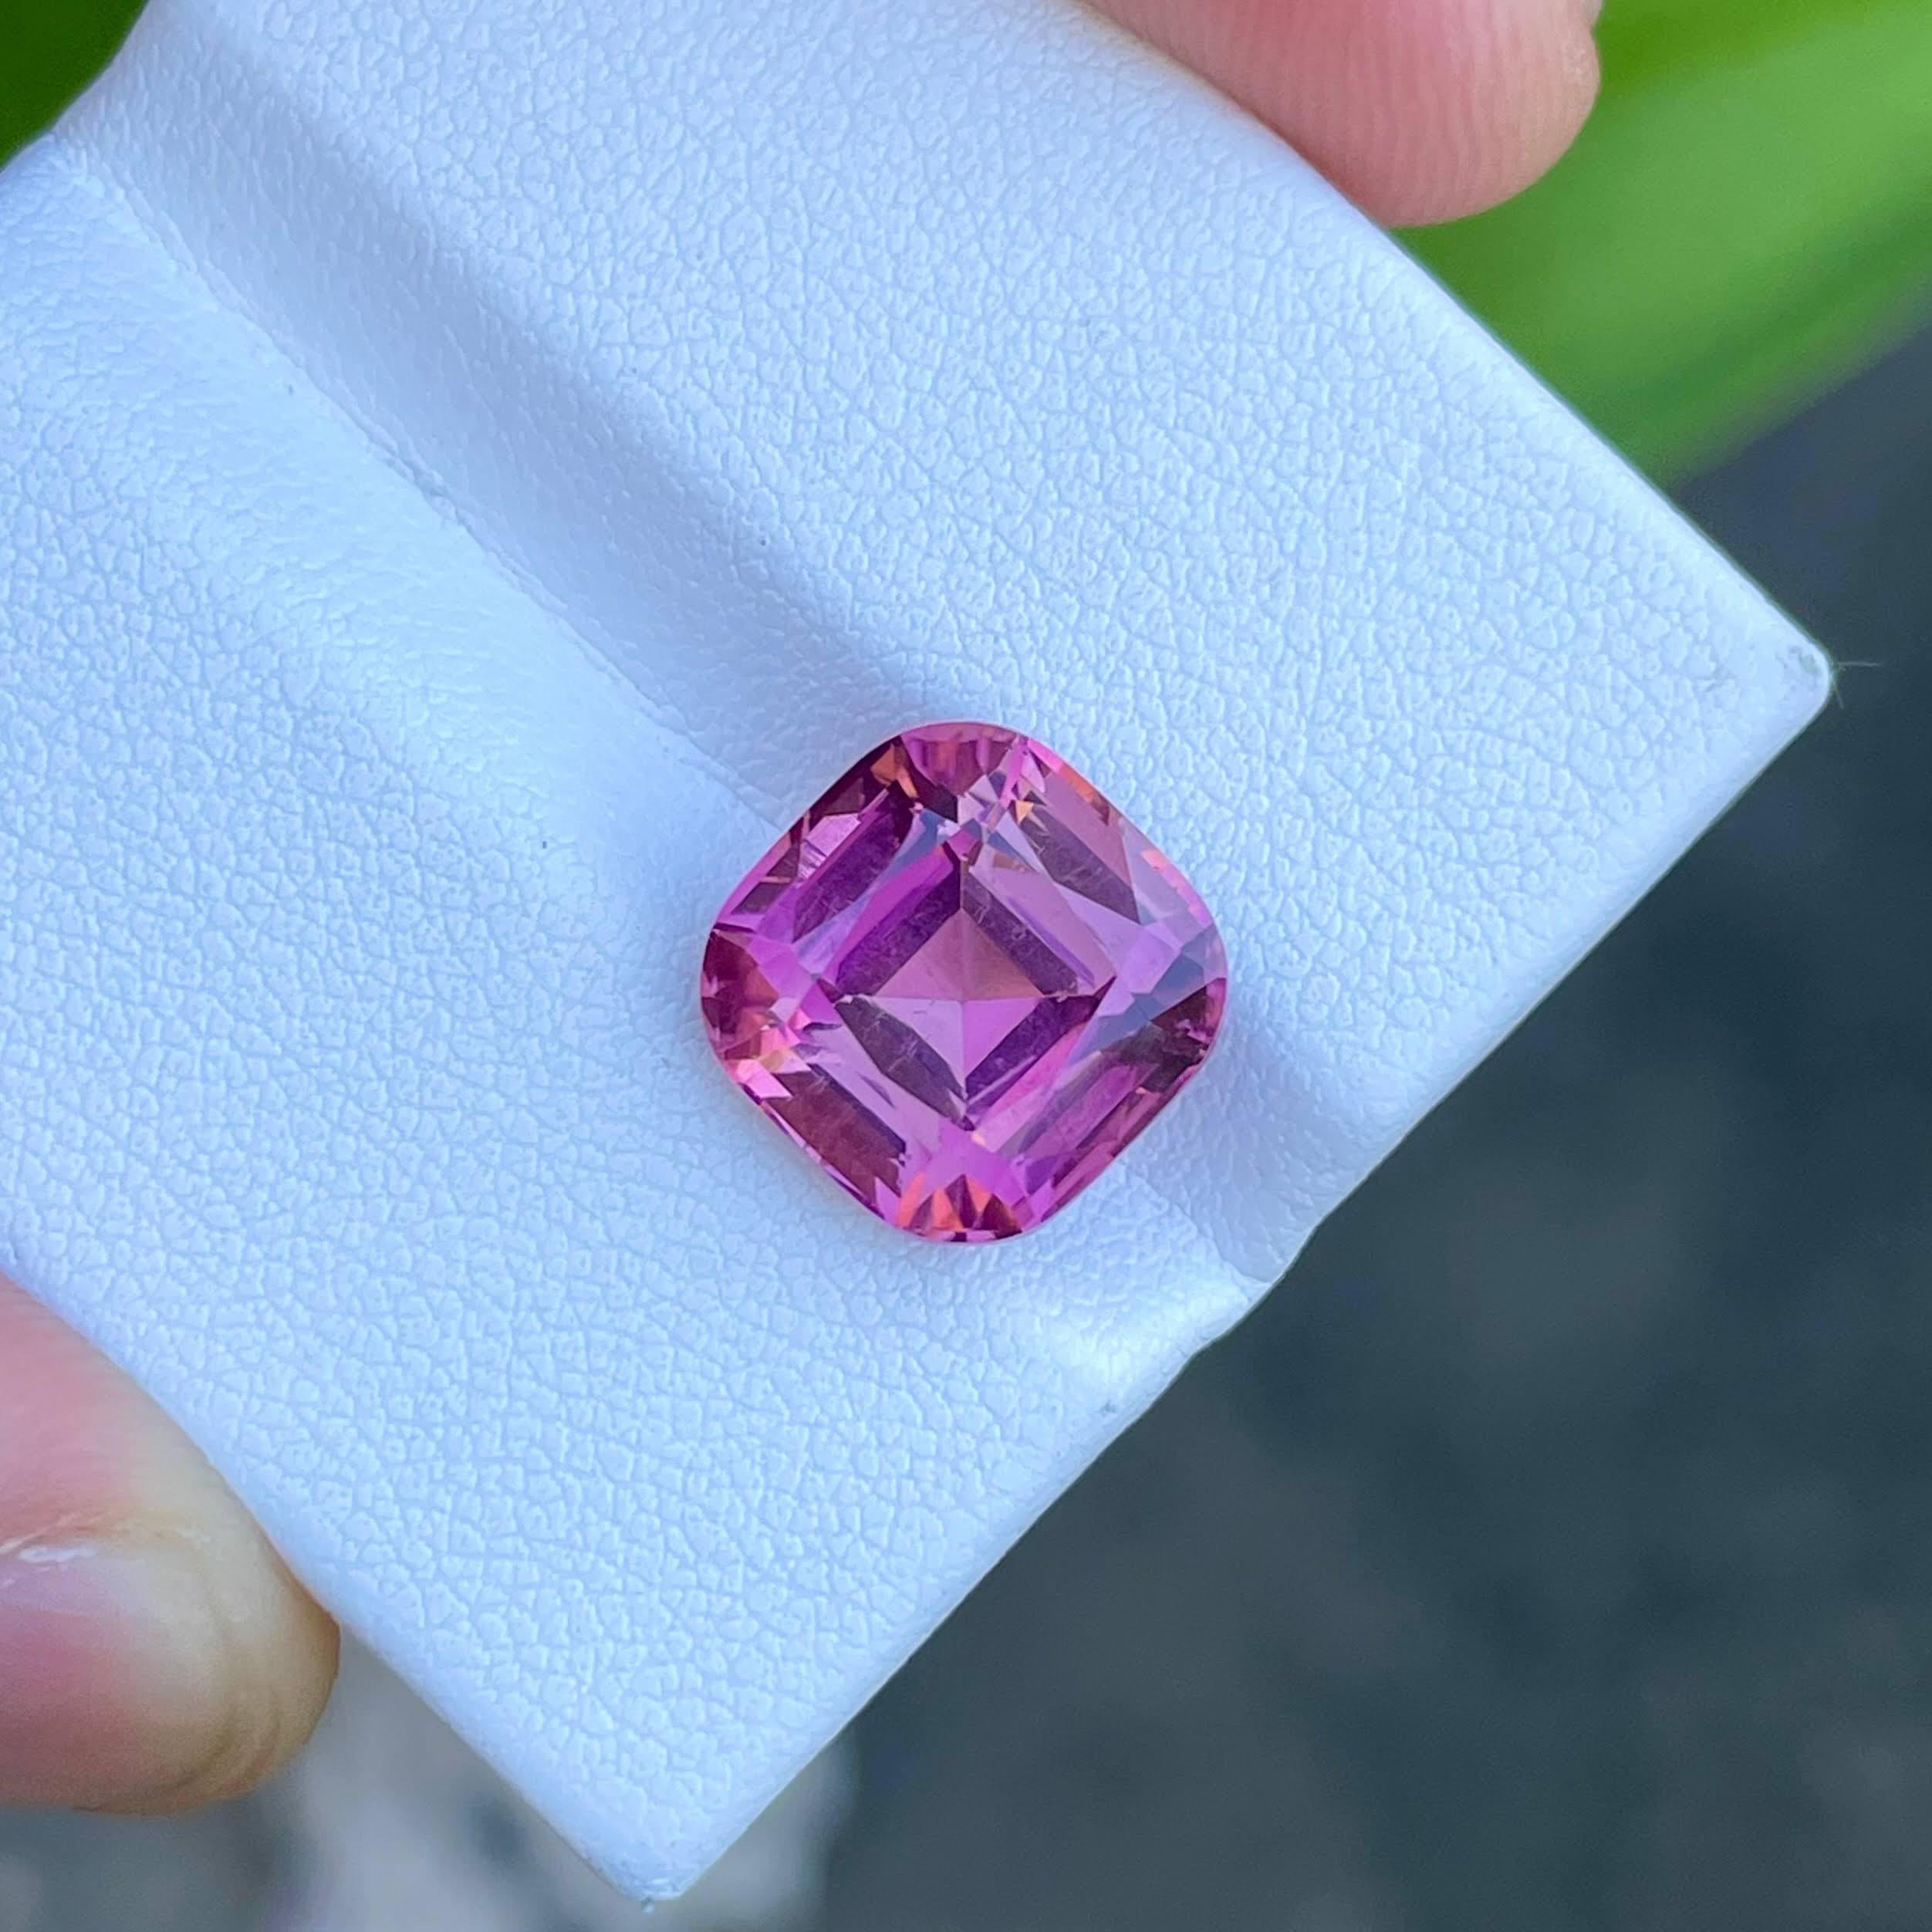 Weight 6.90 carats 
Dimensions 11.0x11.0x8.1 mm
Treatment None
Clarity VS
Origin Afghanistan
Shape Cushion
Cut Step Cushion




Bubblegum Pink Tourmaline Stone, a captivating gem originating from Nigeria, boasts a remarkable 6.90 carats of natural